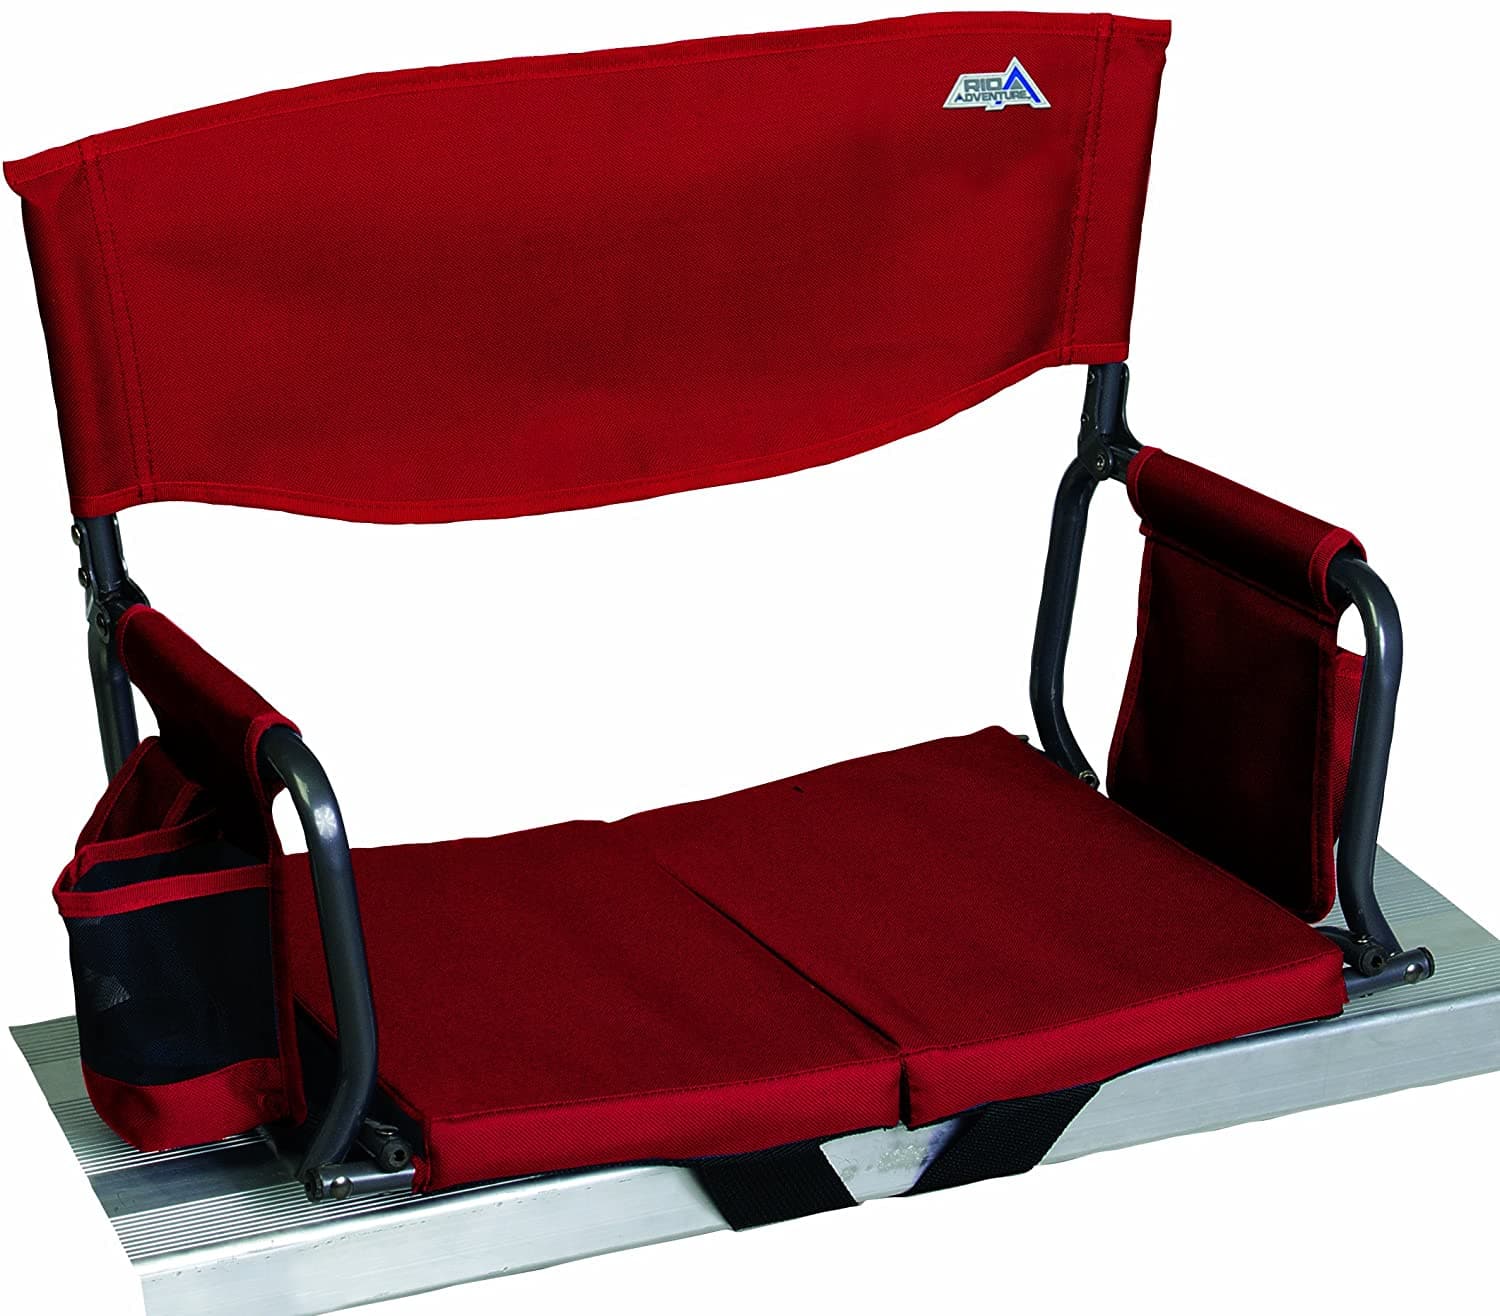 Home-Complete Stadium Seat Chair, 2 Pack- Bleacher Cushions with Padded Back Support, Armrests, 6 Reclining Positions and Portable Carry Straps